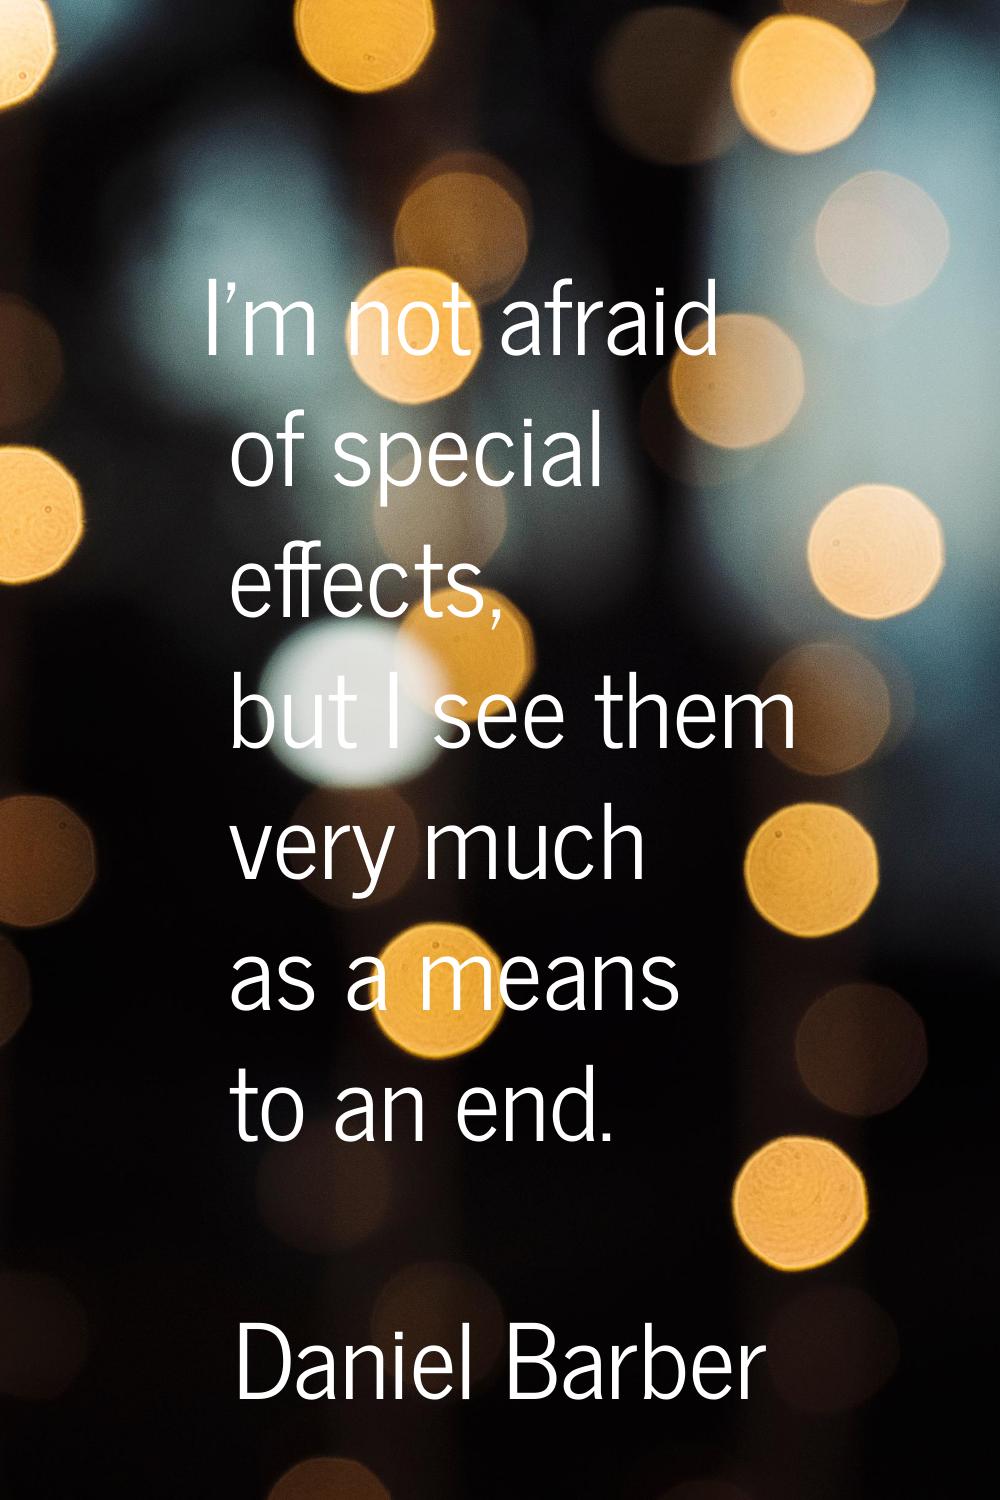 I'm not afraid of special effects, but I see them very much as a means to an end.